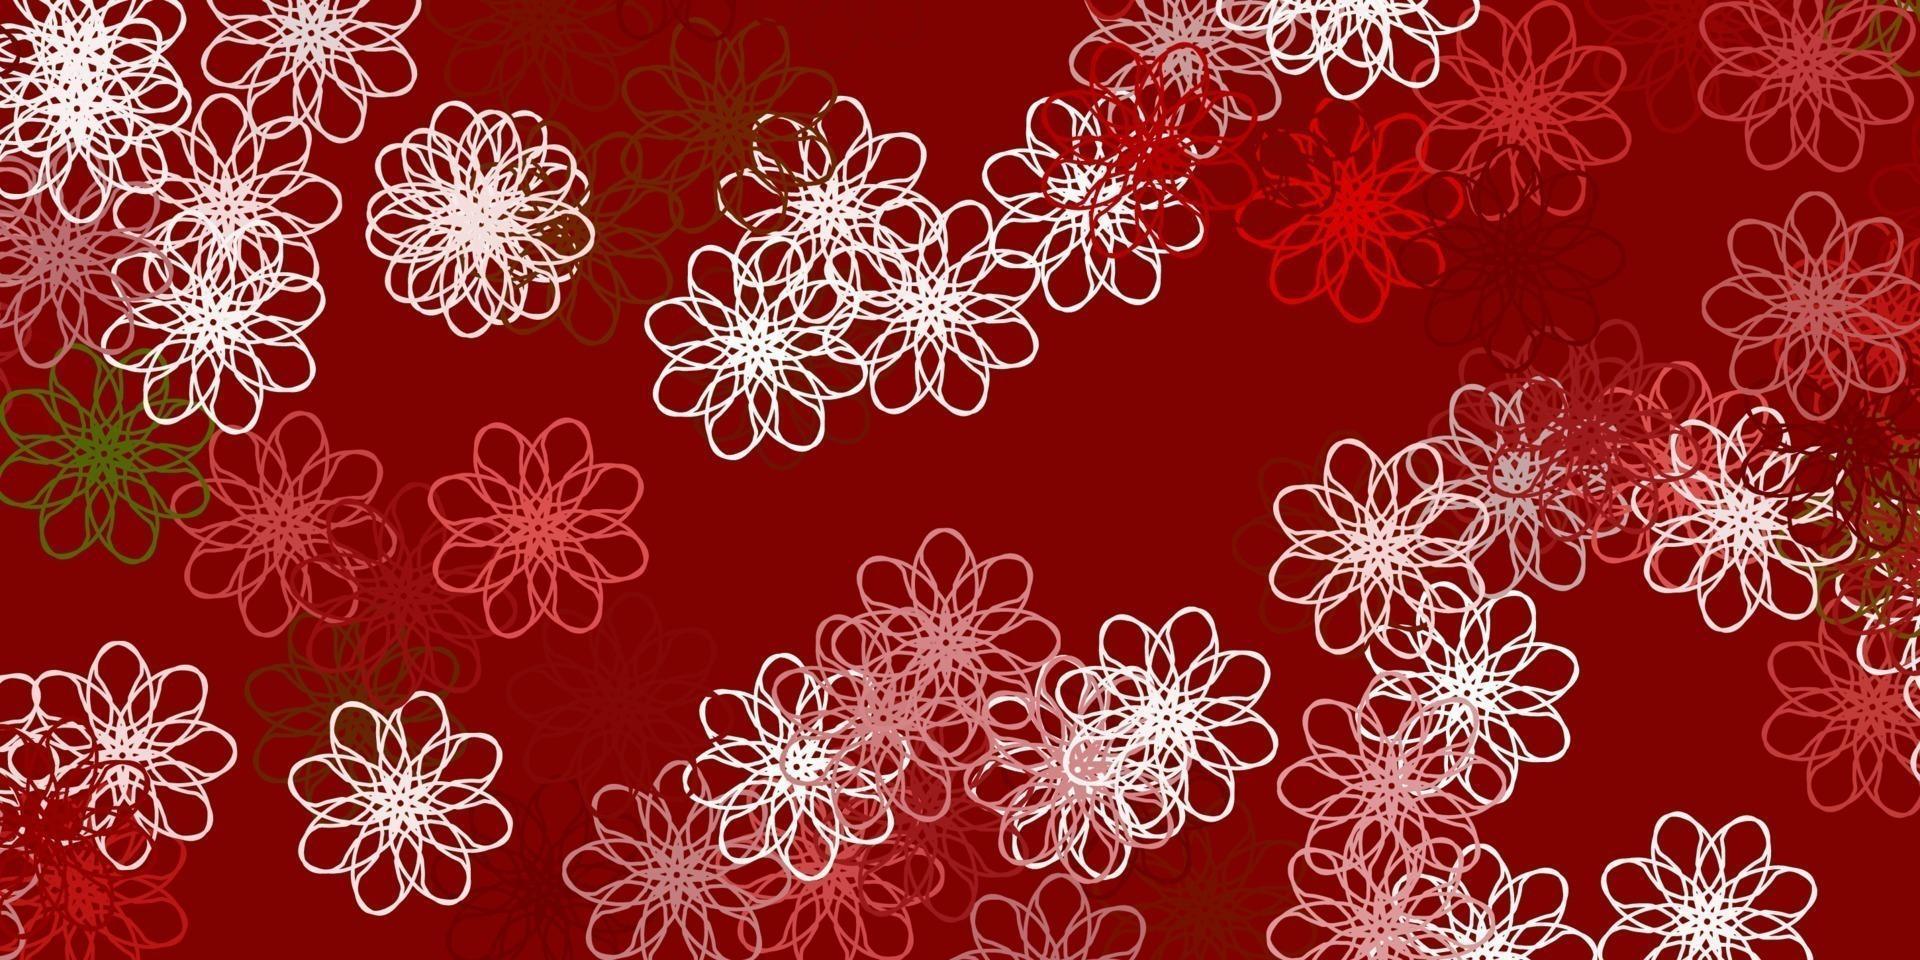 Light Green, Red vector doodle pattern with flowers.